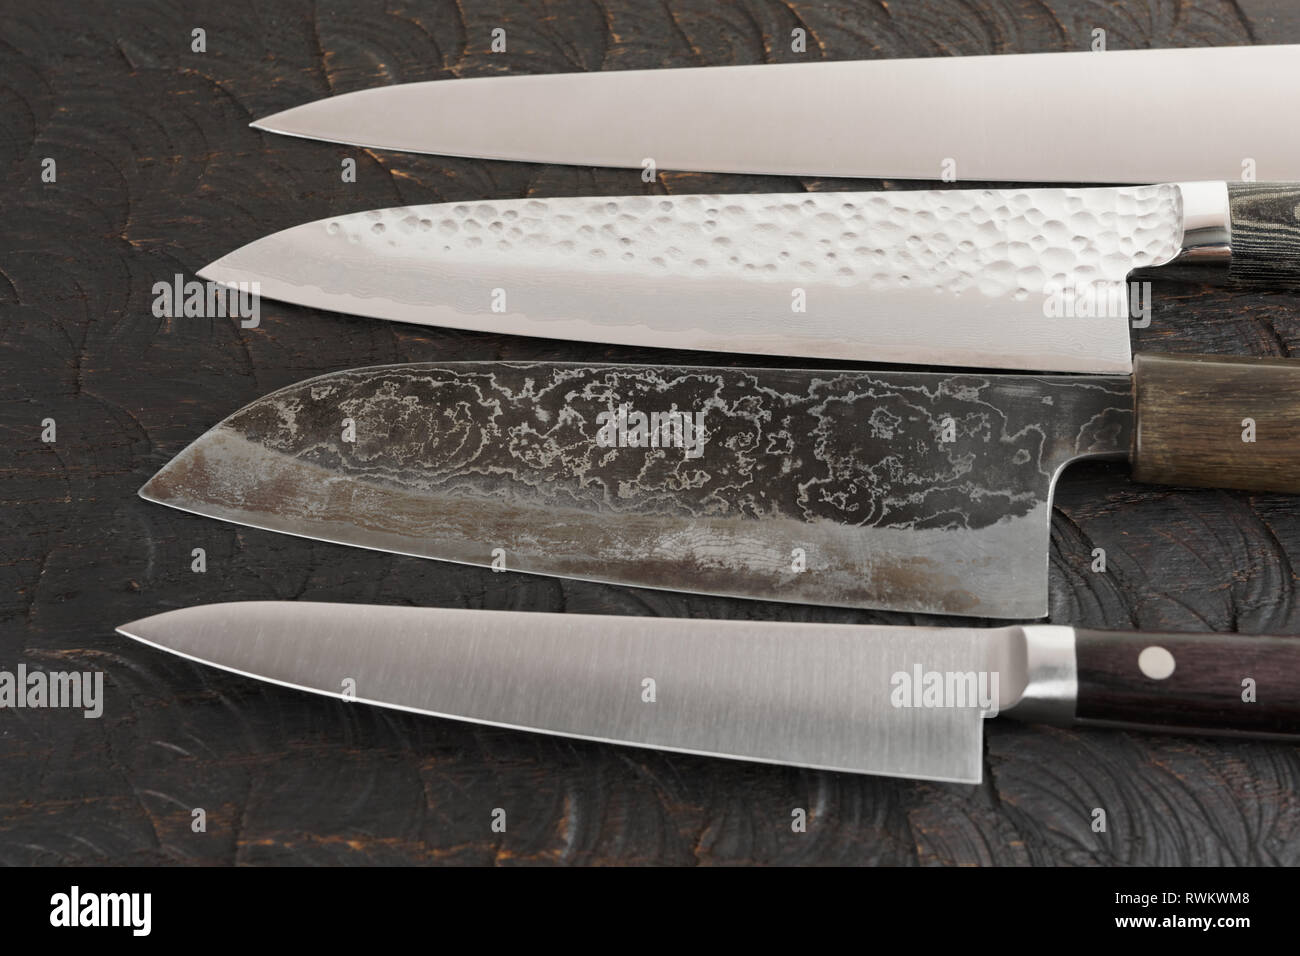 Four new and used knives on black cutting board Stock Photo